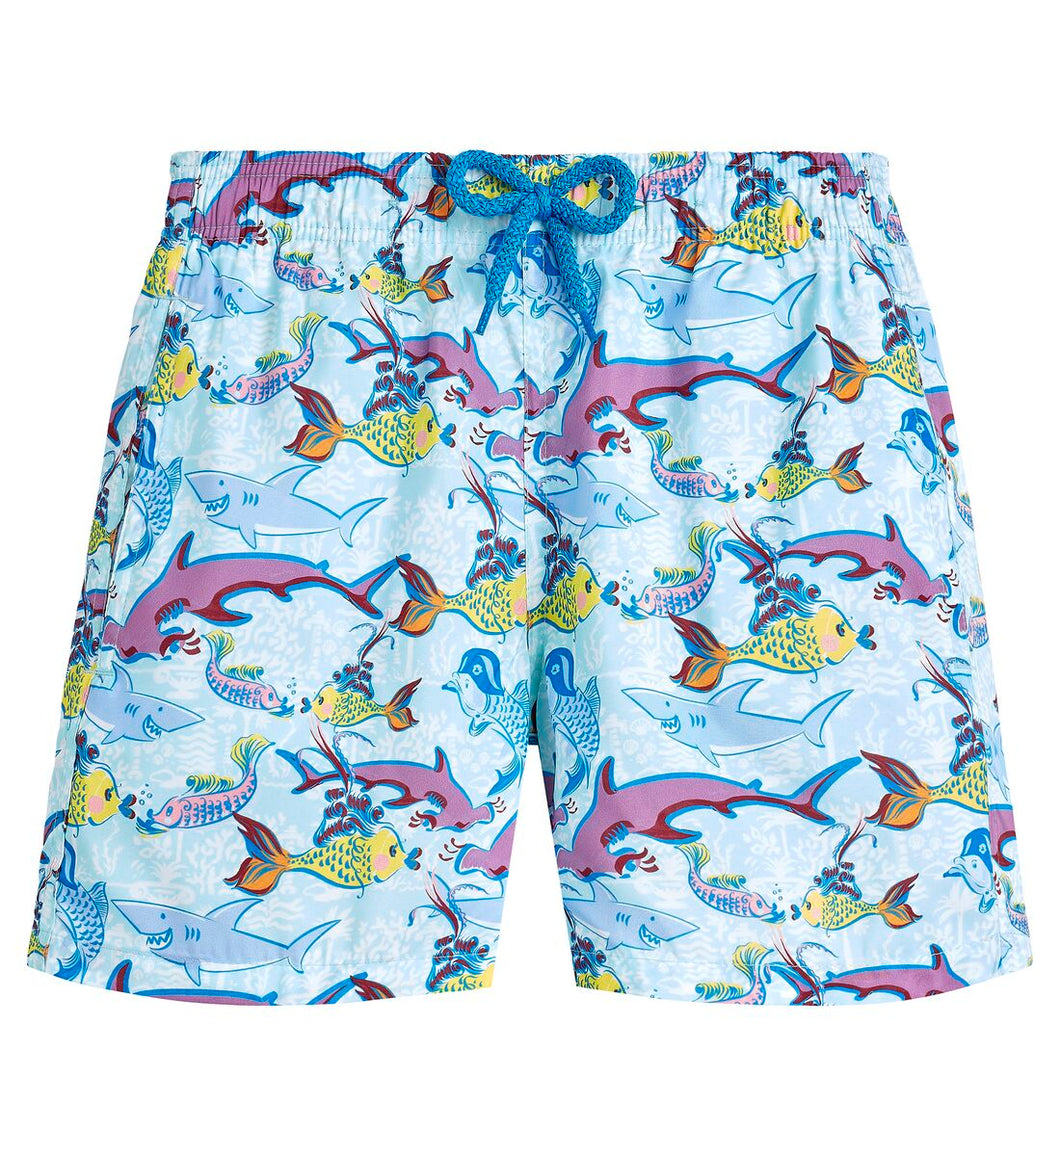 Boys Ultra-Light and Packable Swim Trunks French History